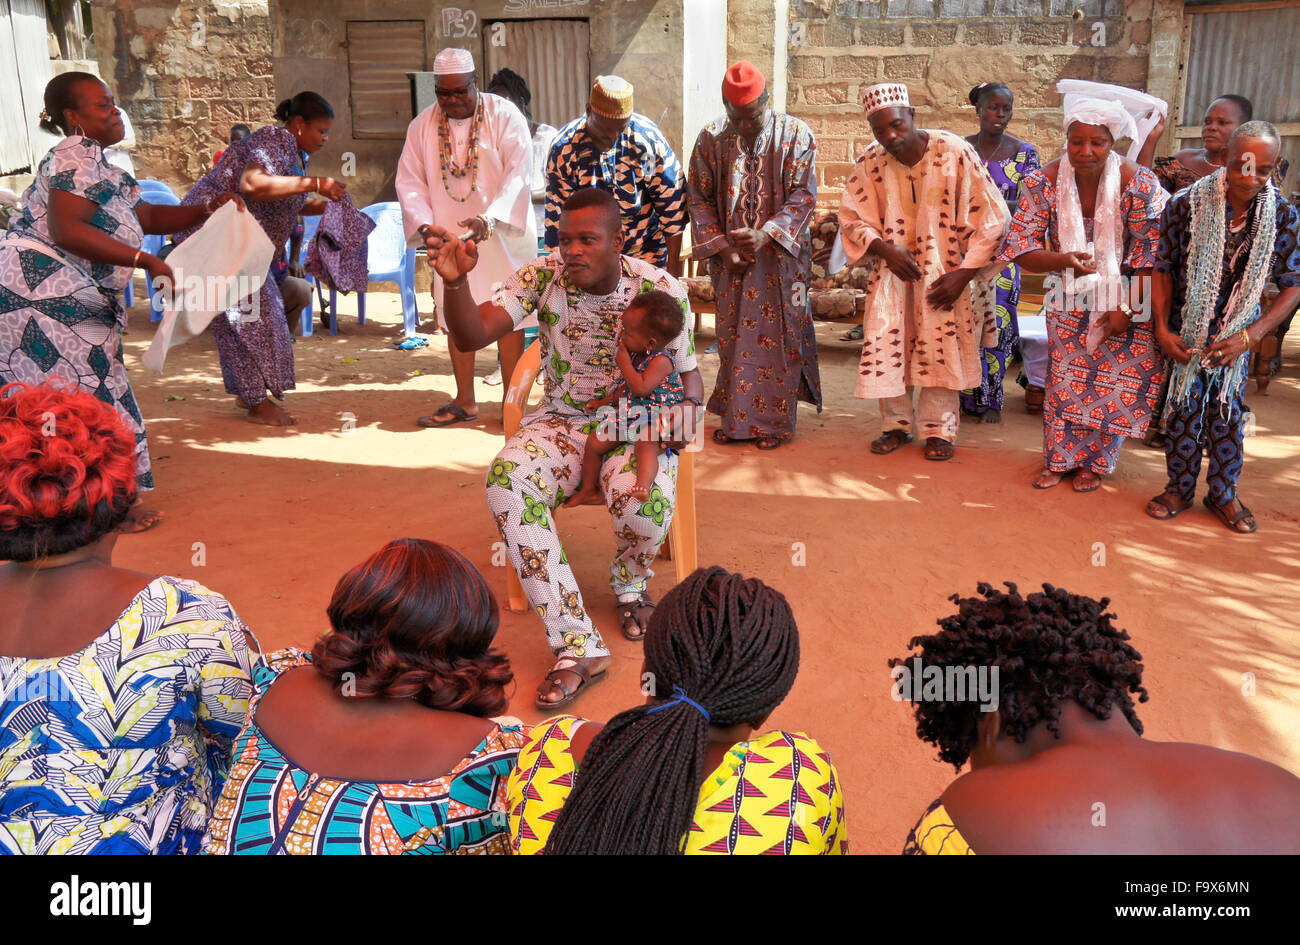 Ewe priest, priestess, dignitaries, and others participating in a Tron vodun (voodoo) ceremony, Lome, Togo Stock Photo